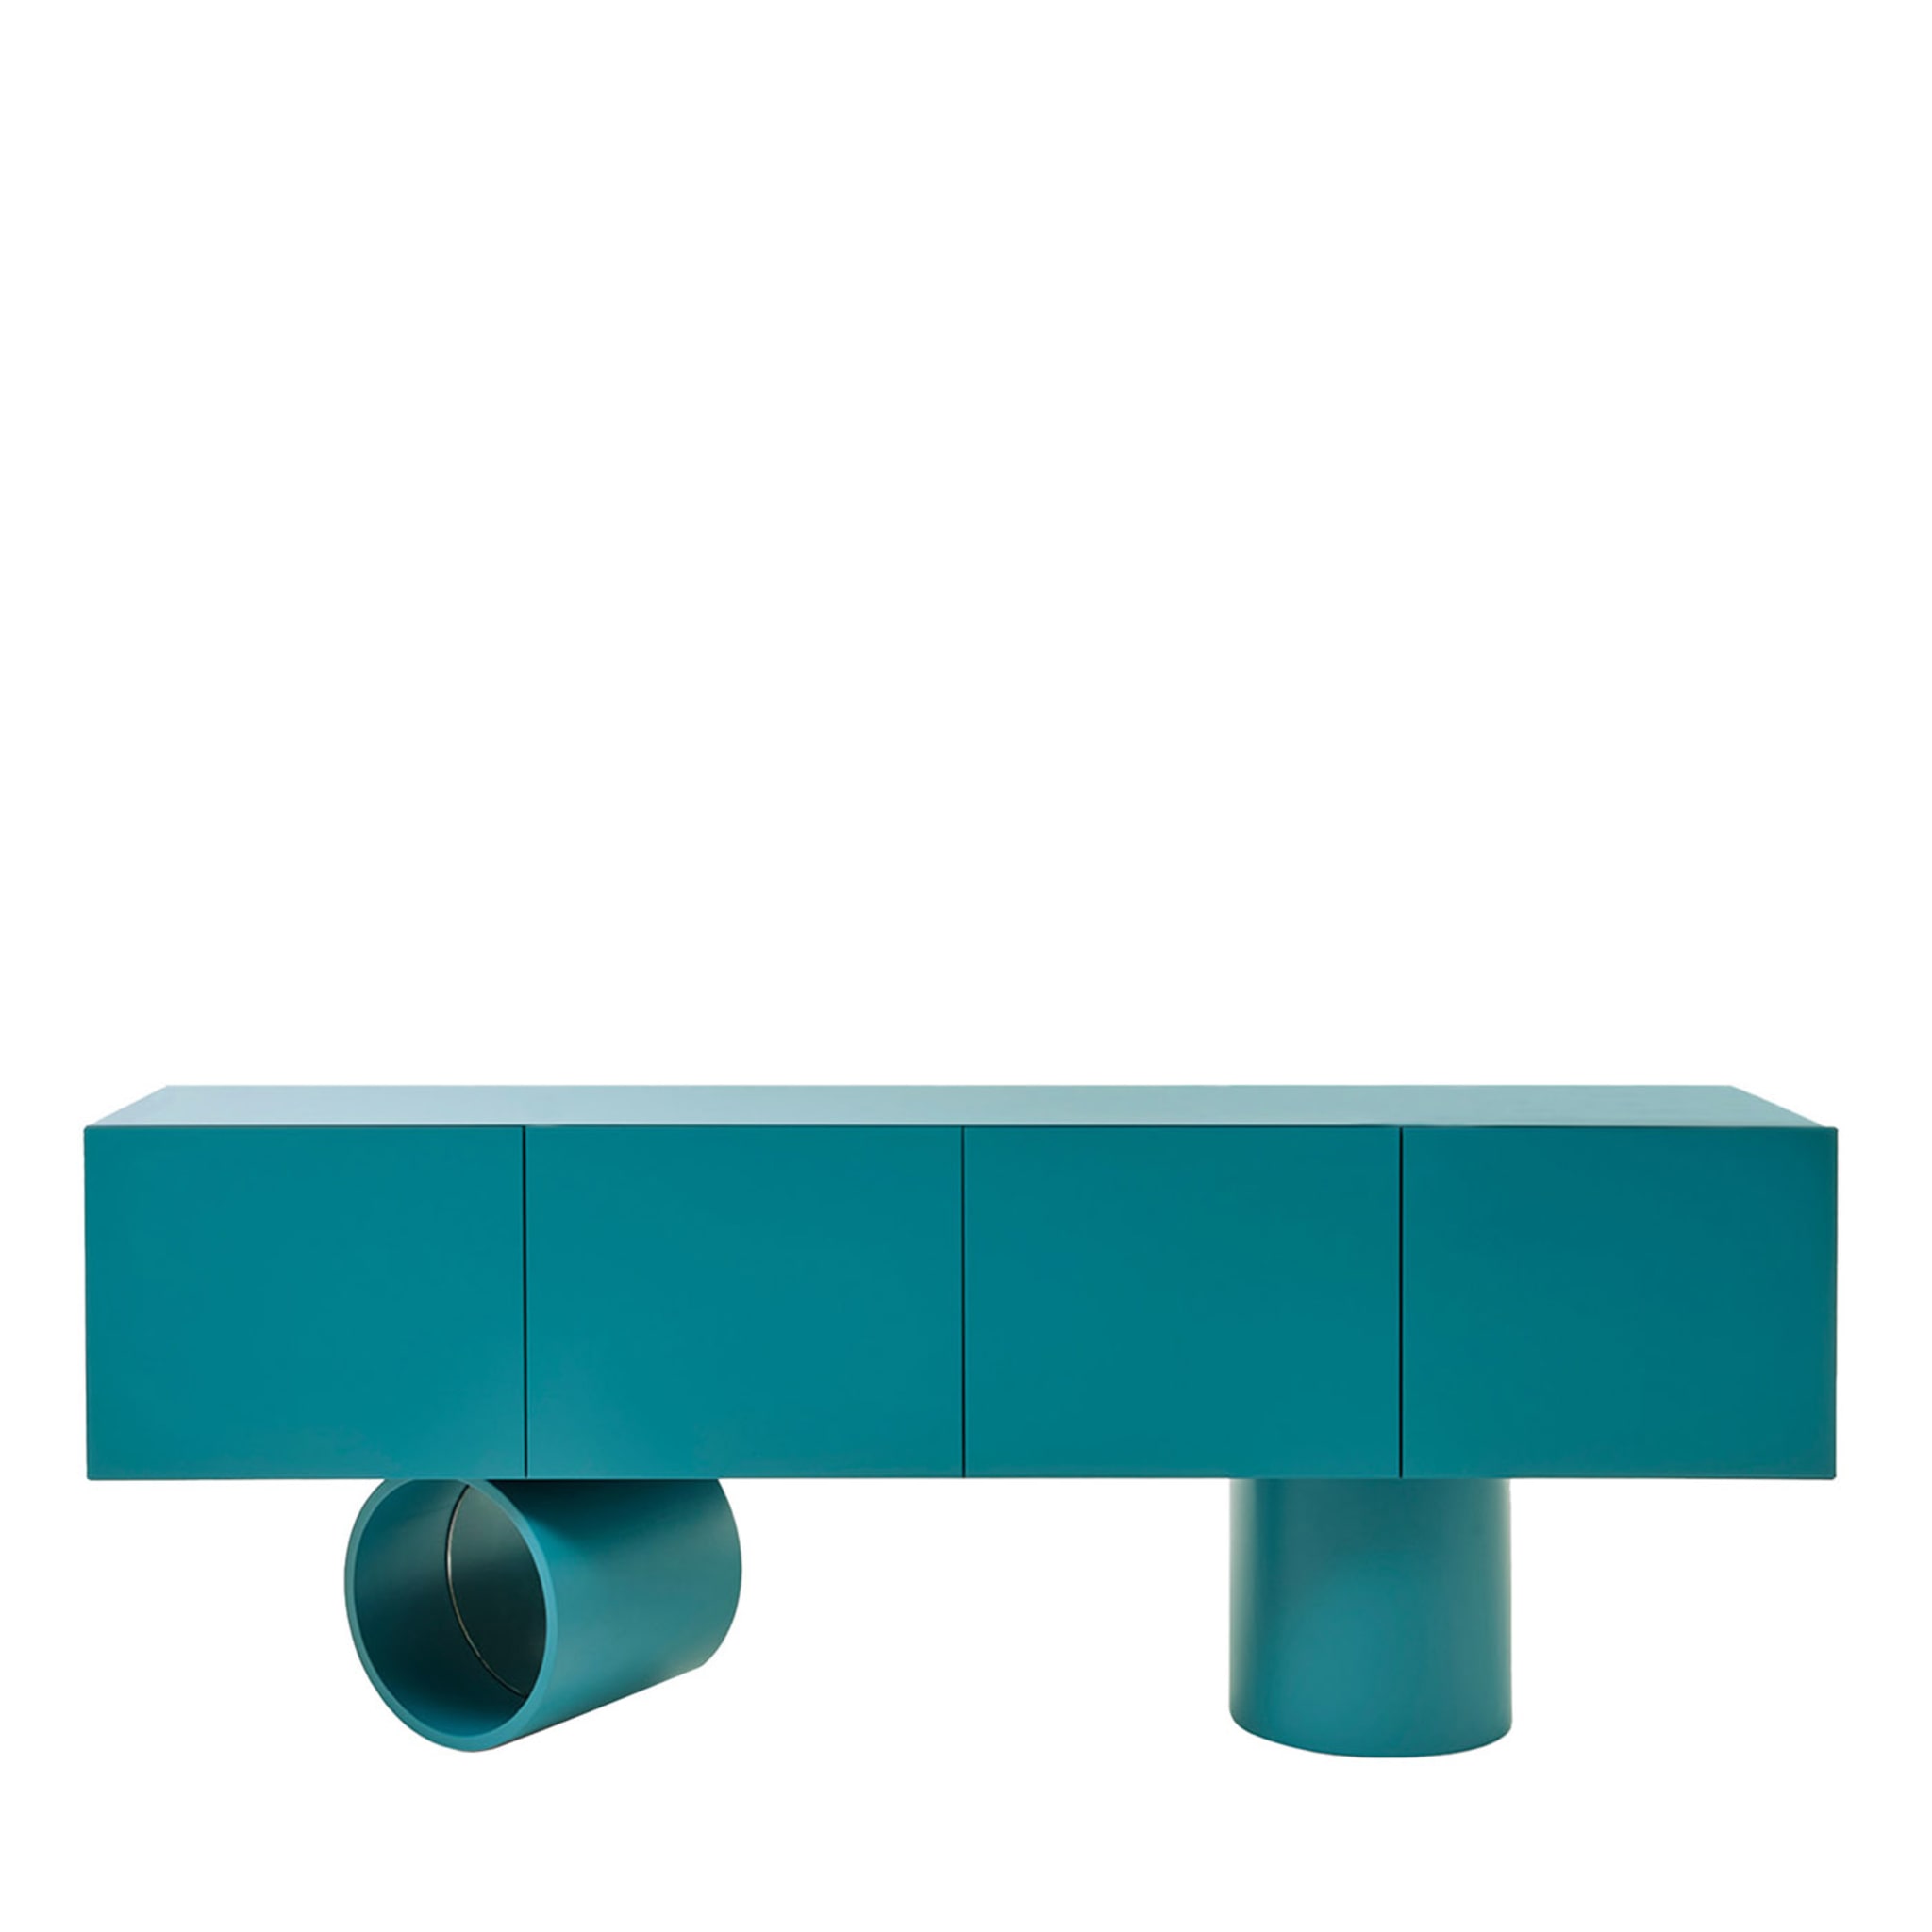 Giunone Teal Sideboard 2 by Claudio Bitetti - Main view